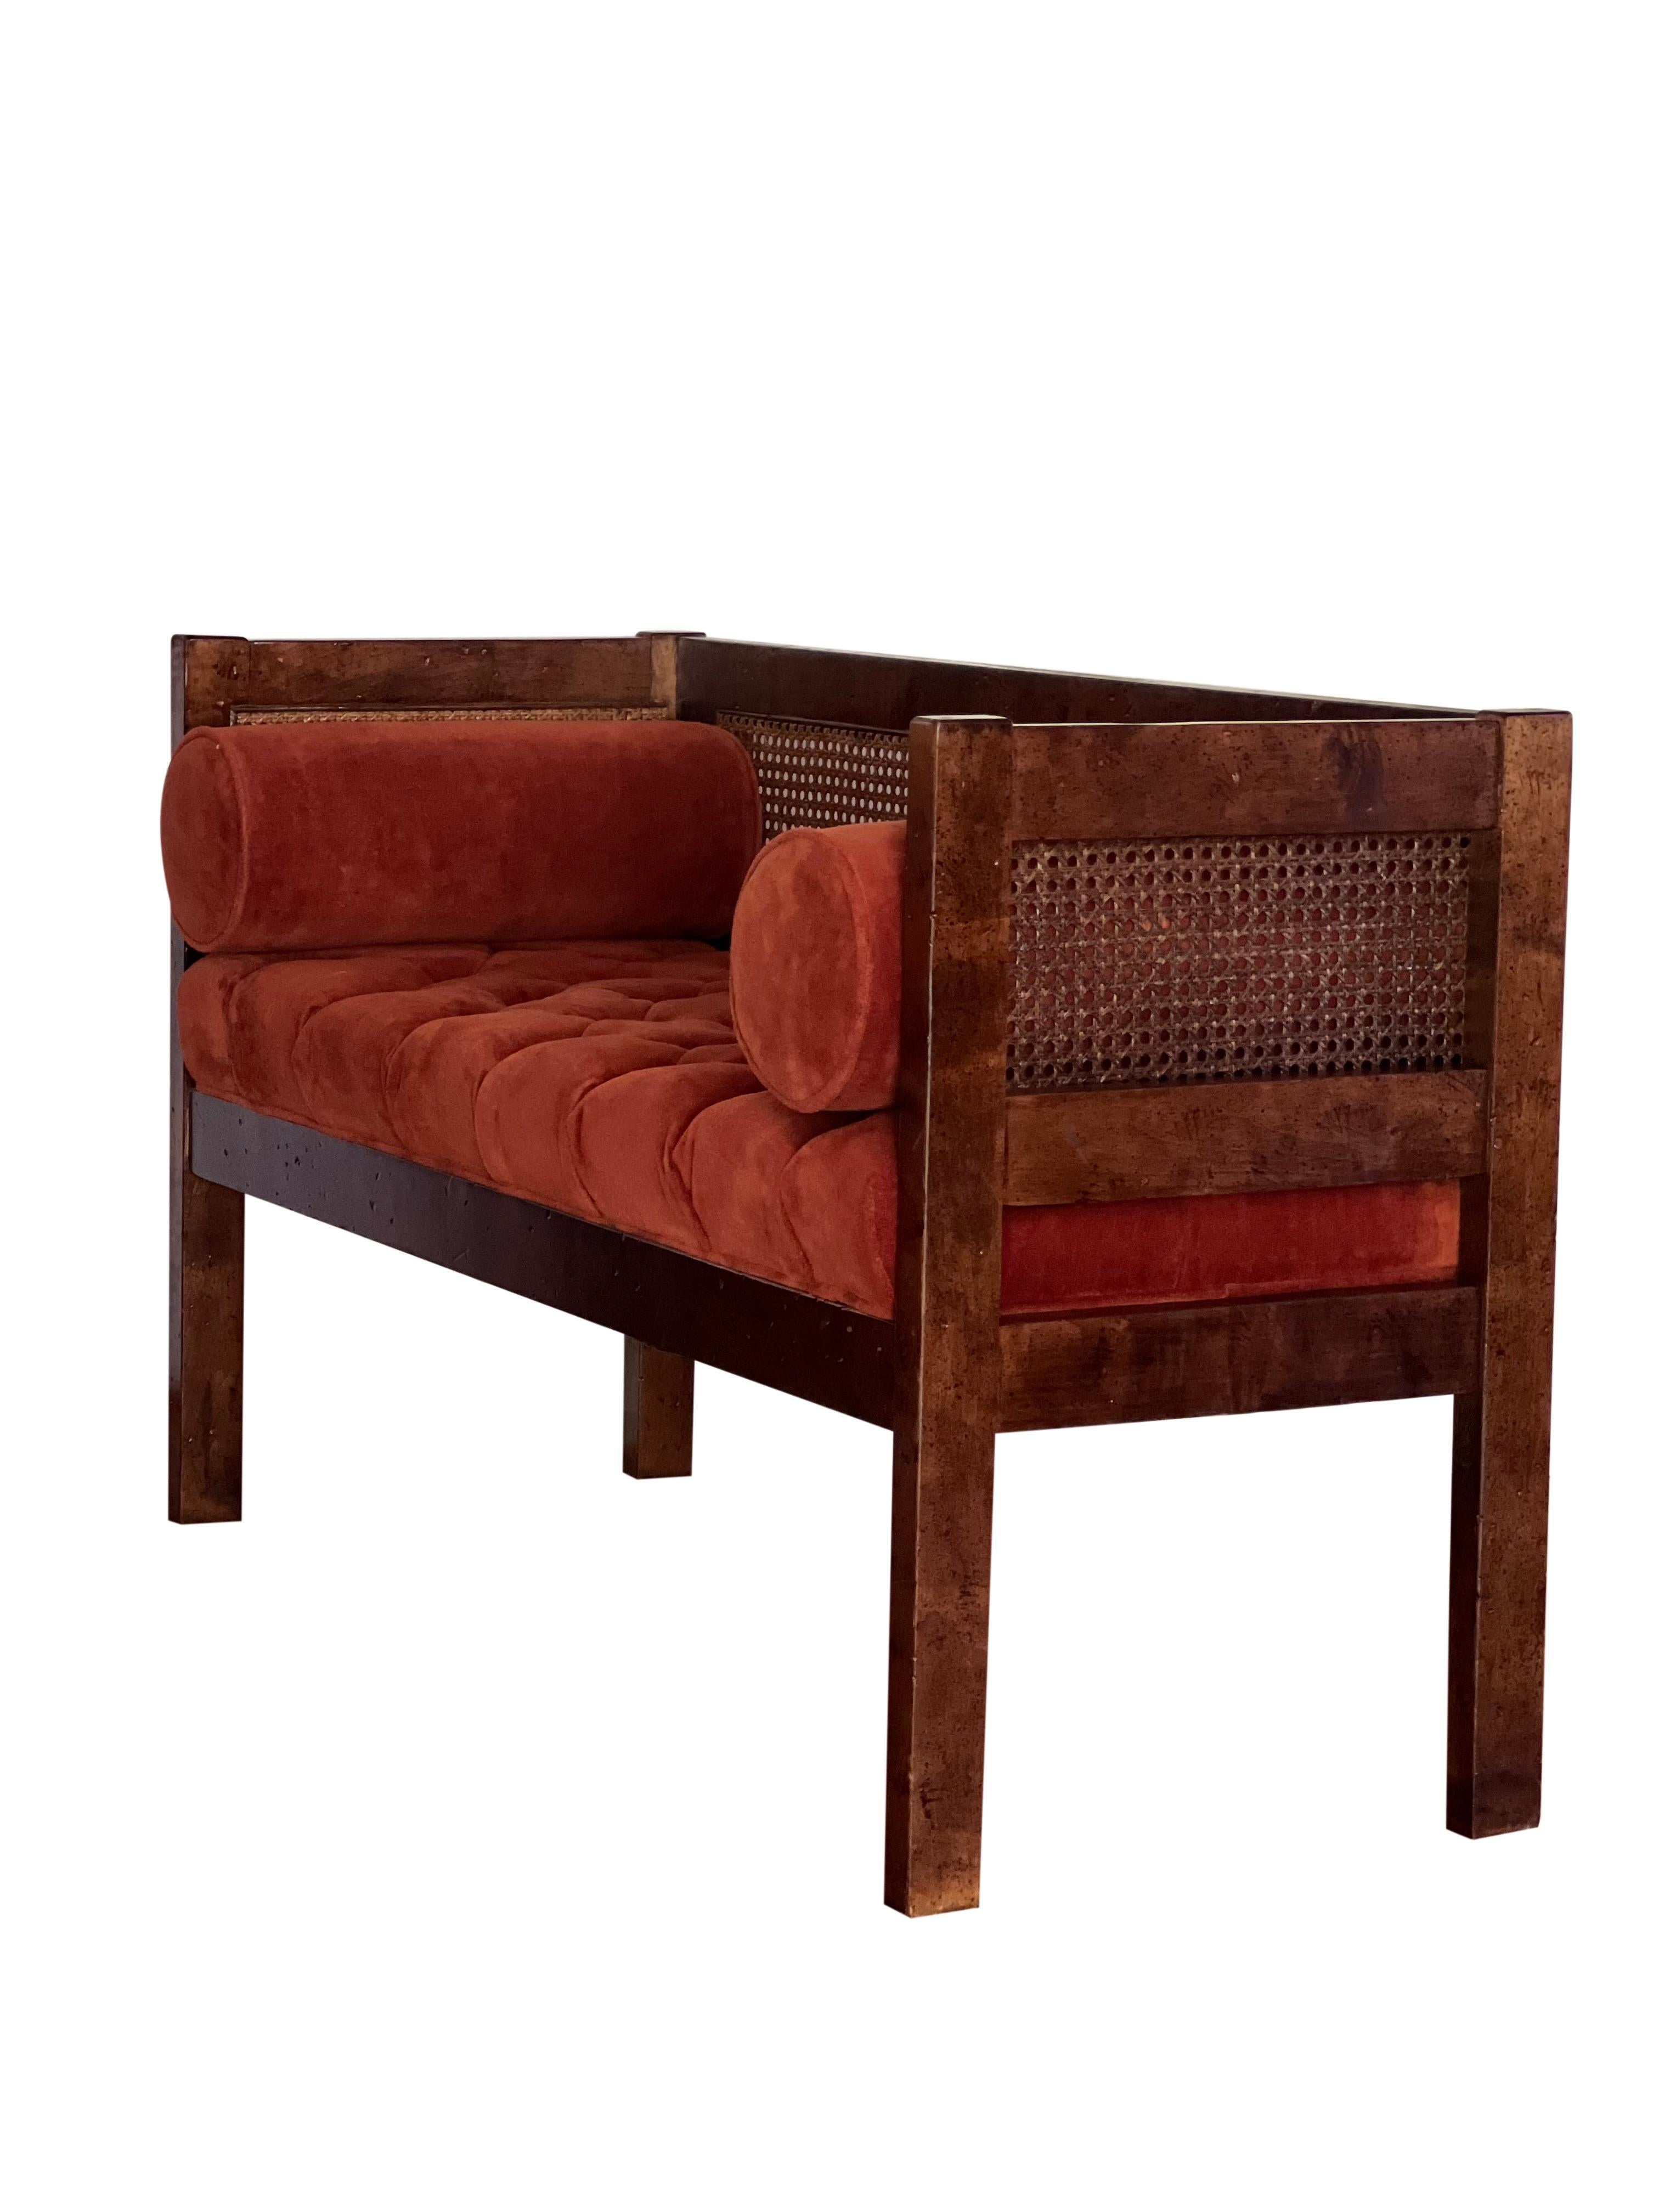 Elegant vintage Hollywood Regency cane parlor bench. 

The bench features button tufted velvet upholstery in persimmon with two matching bolsters. The seat cushion is attached to the piece. The cane back and sides are in good condition, no holes